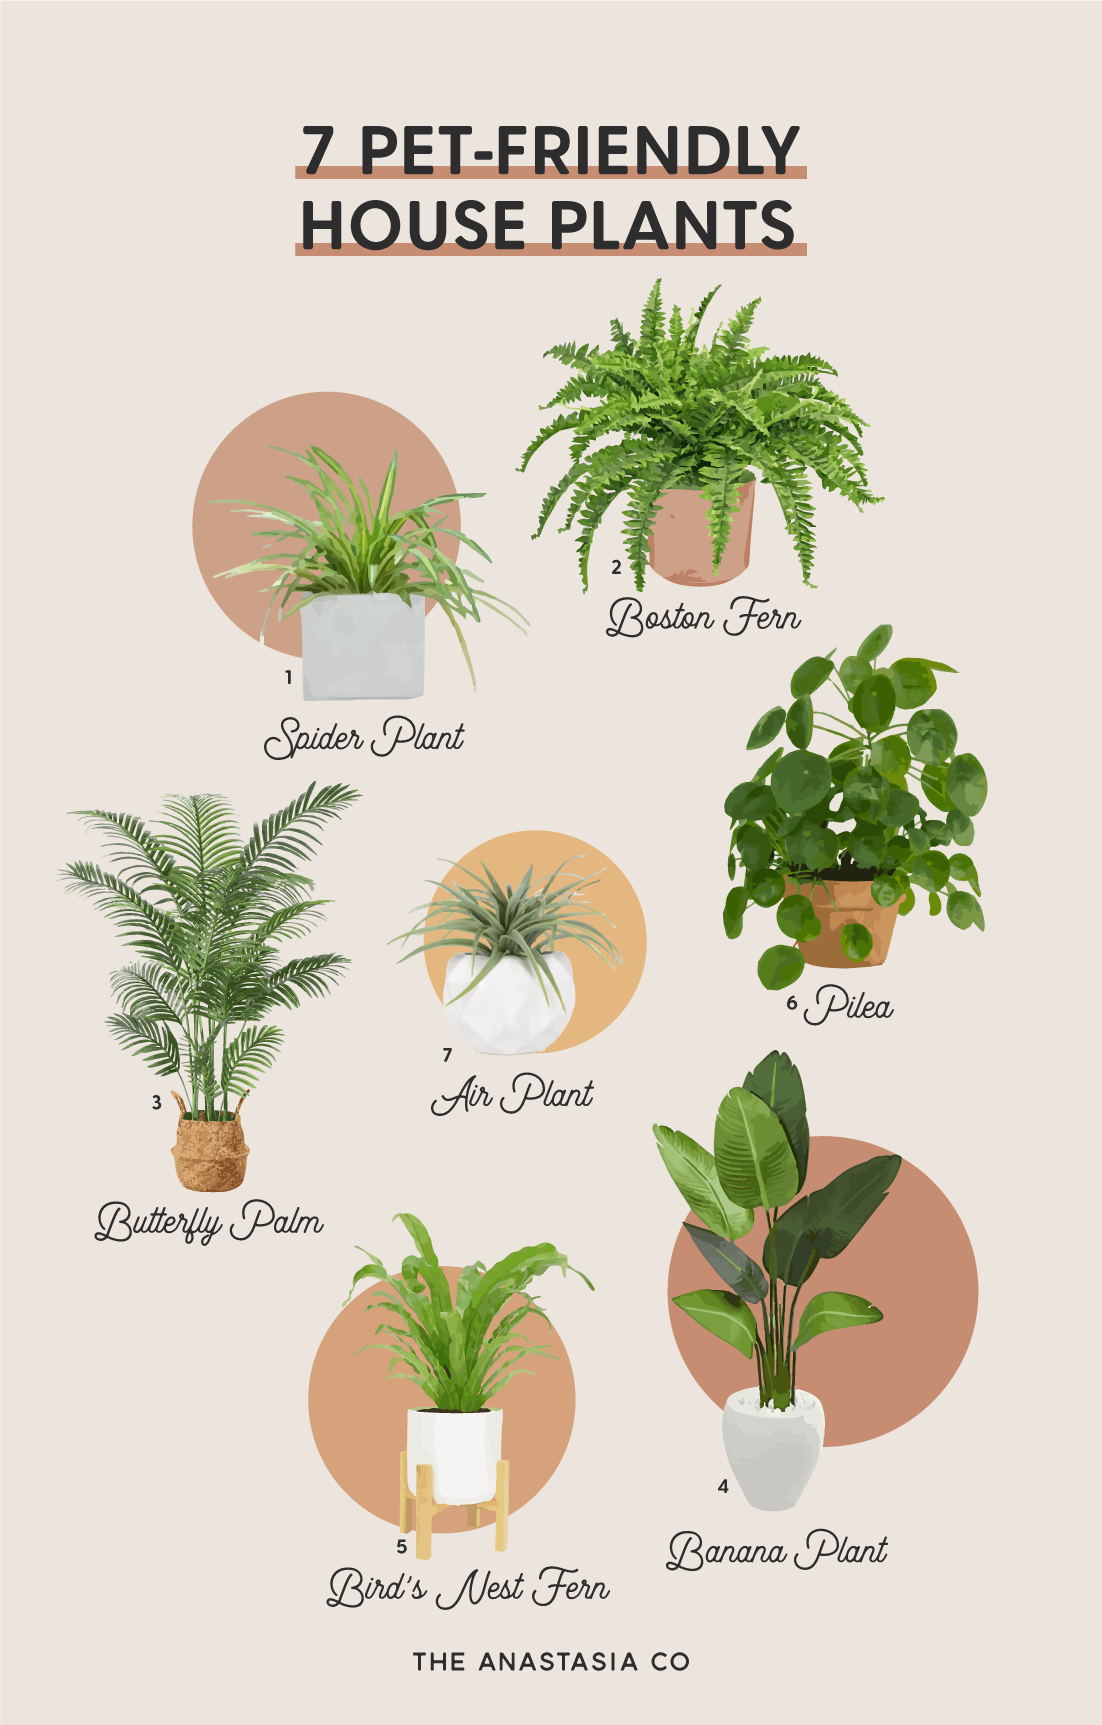 Keep your best friend healthy and enjoy all the benefits of indoor plants with these pet-friendly house plant ideas!